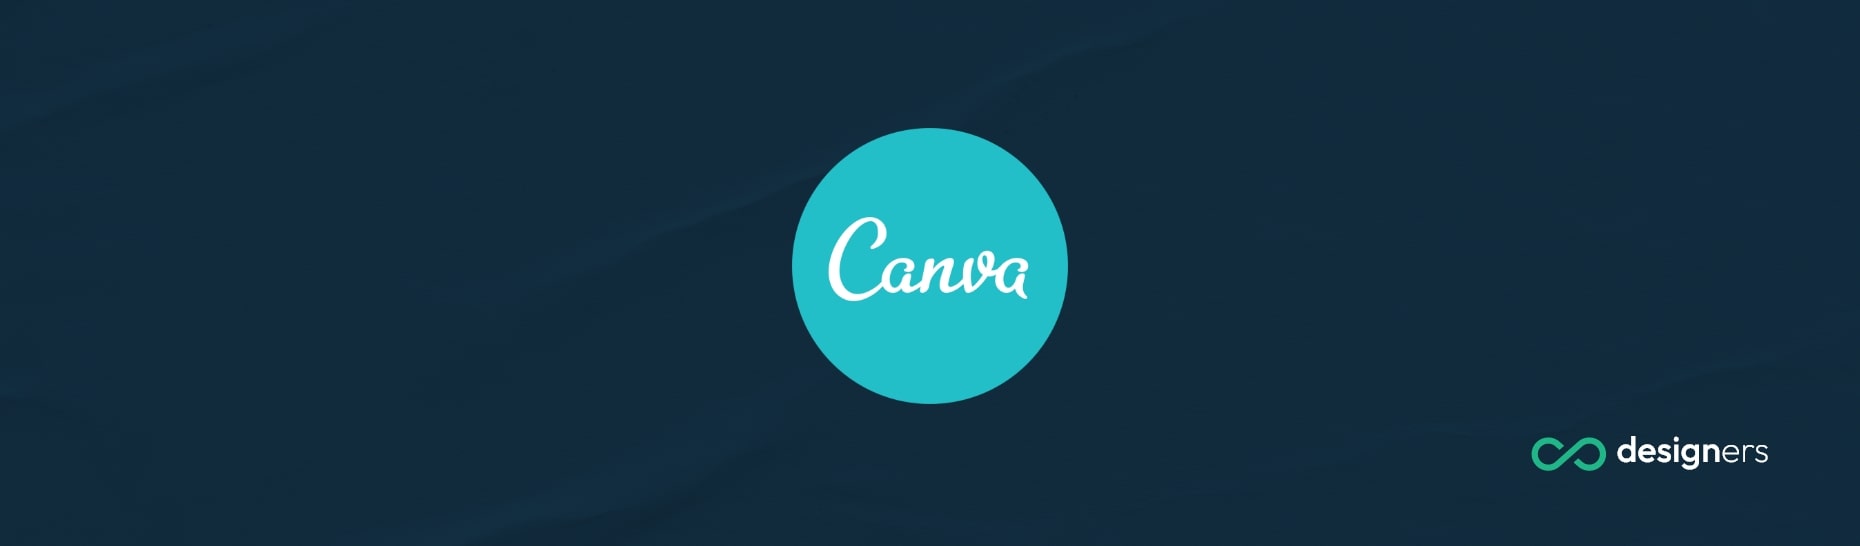 What Does Command R Do in Canva?